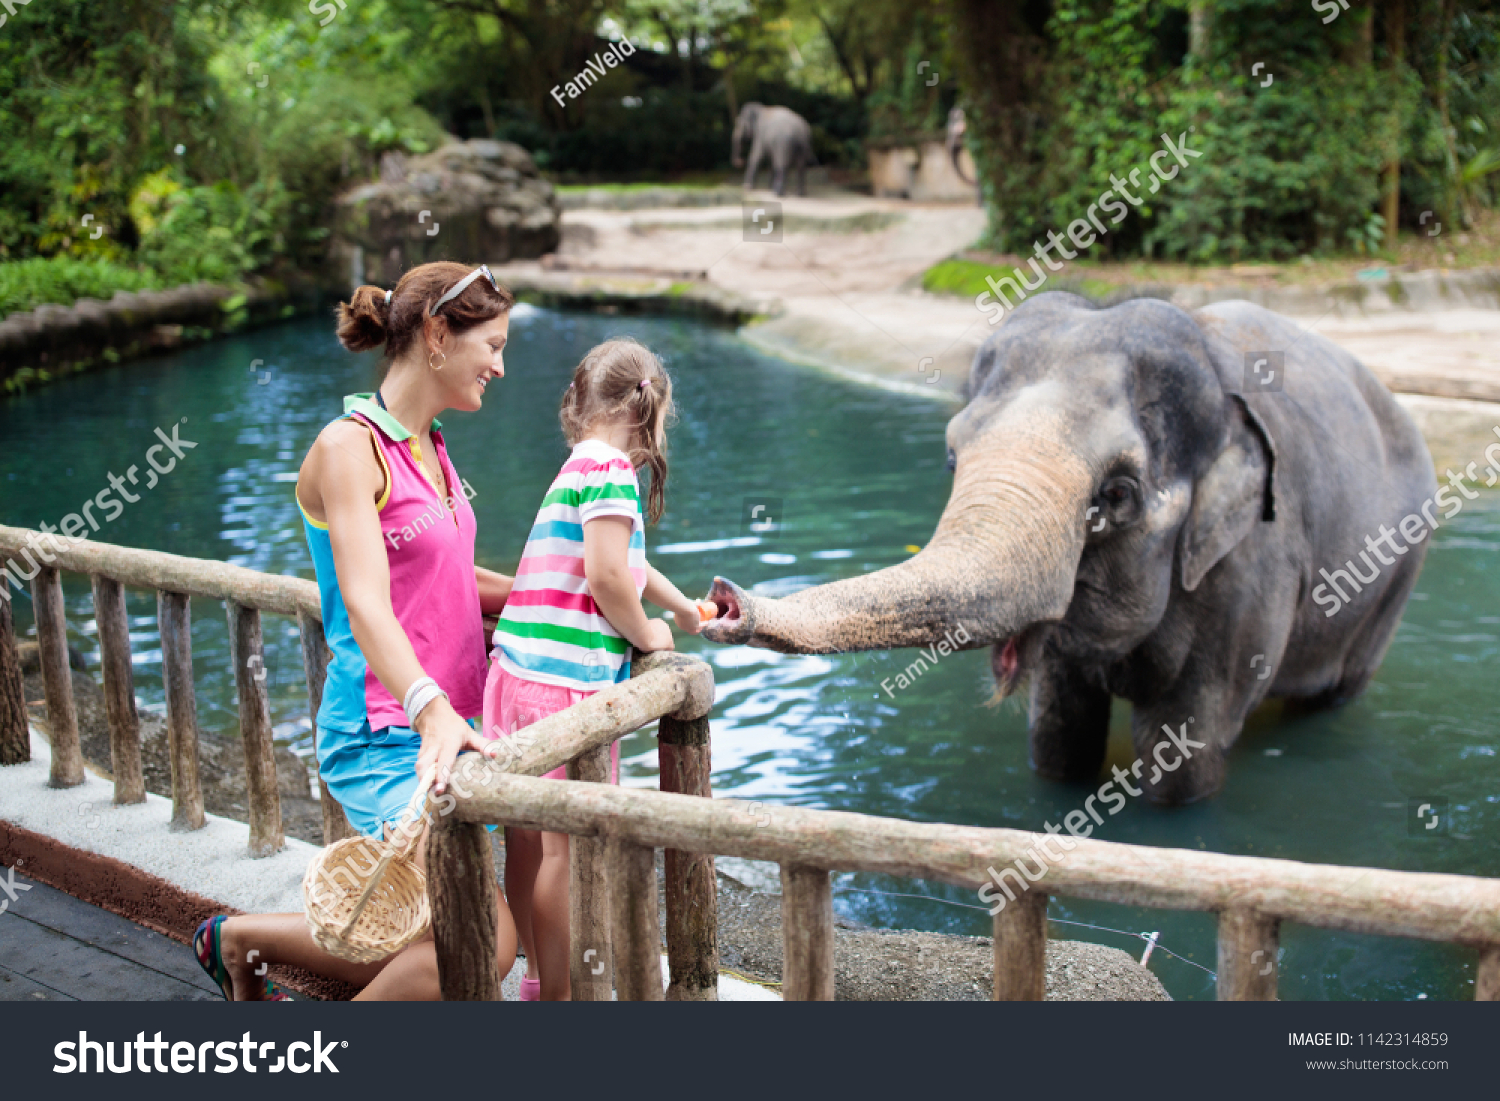  Family feeding elephant in zoo. Mother and child feed Asian elephants in tropical safari park during summer vacation in Singapore. Kids watch animals. Little girl giving fruit to wild animal.  #1142314859